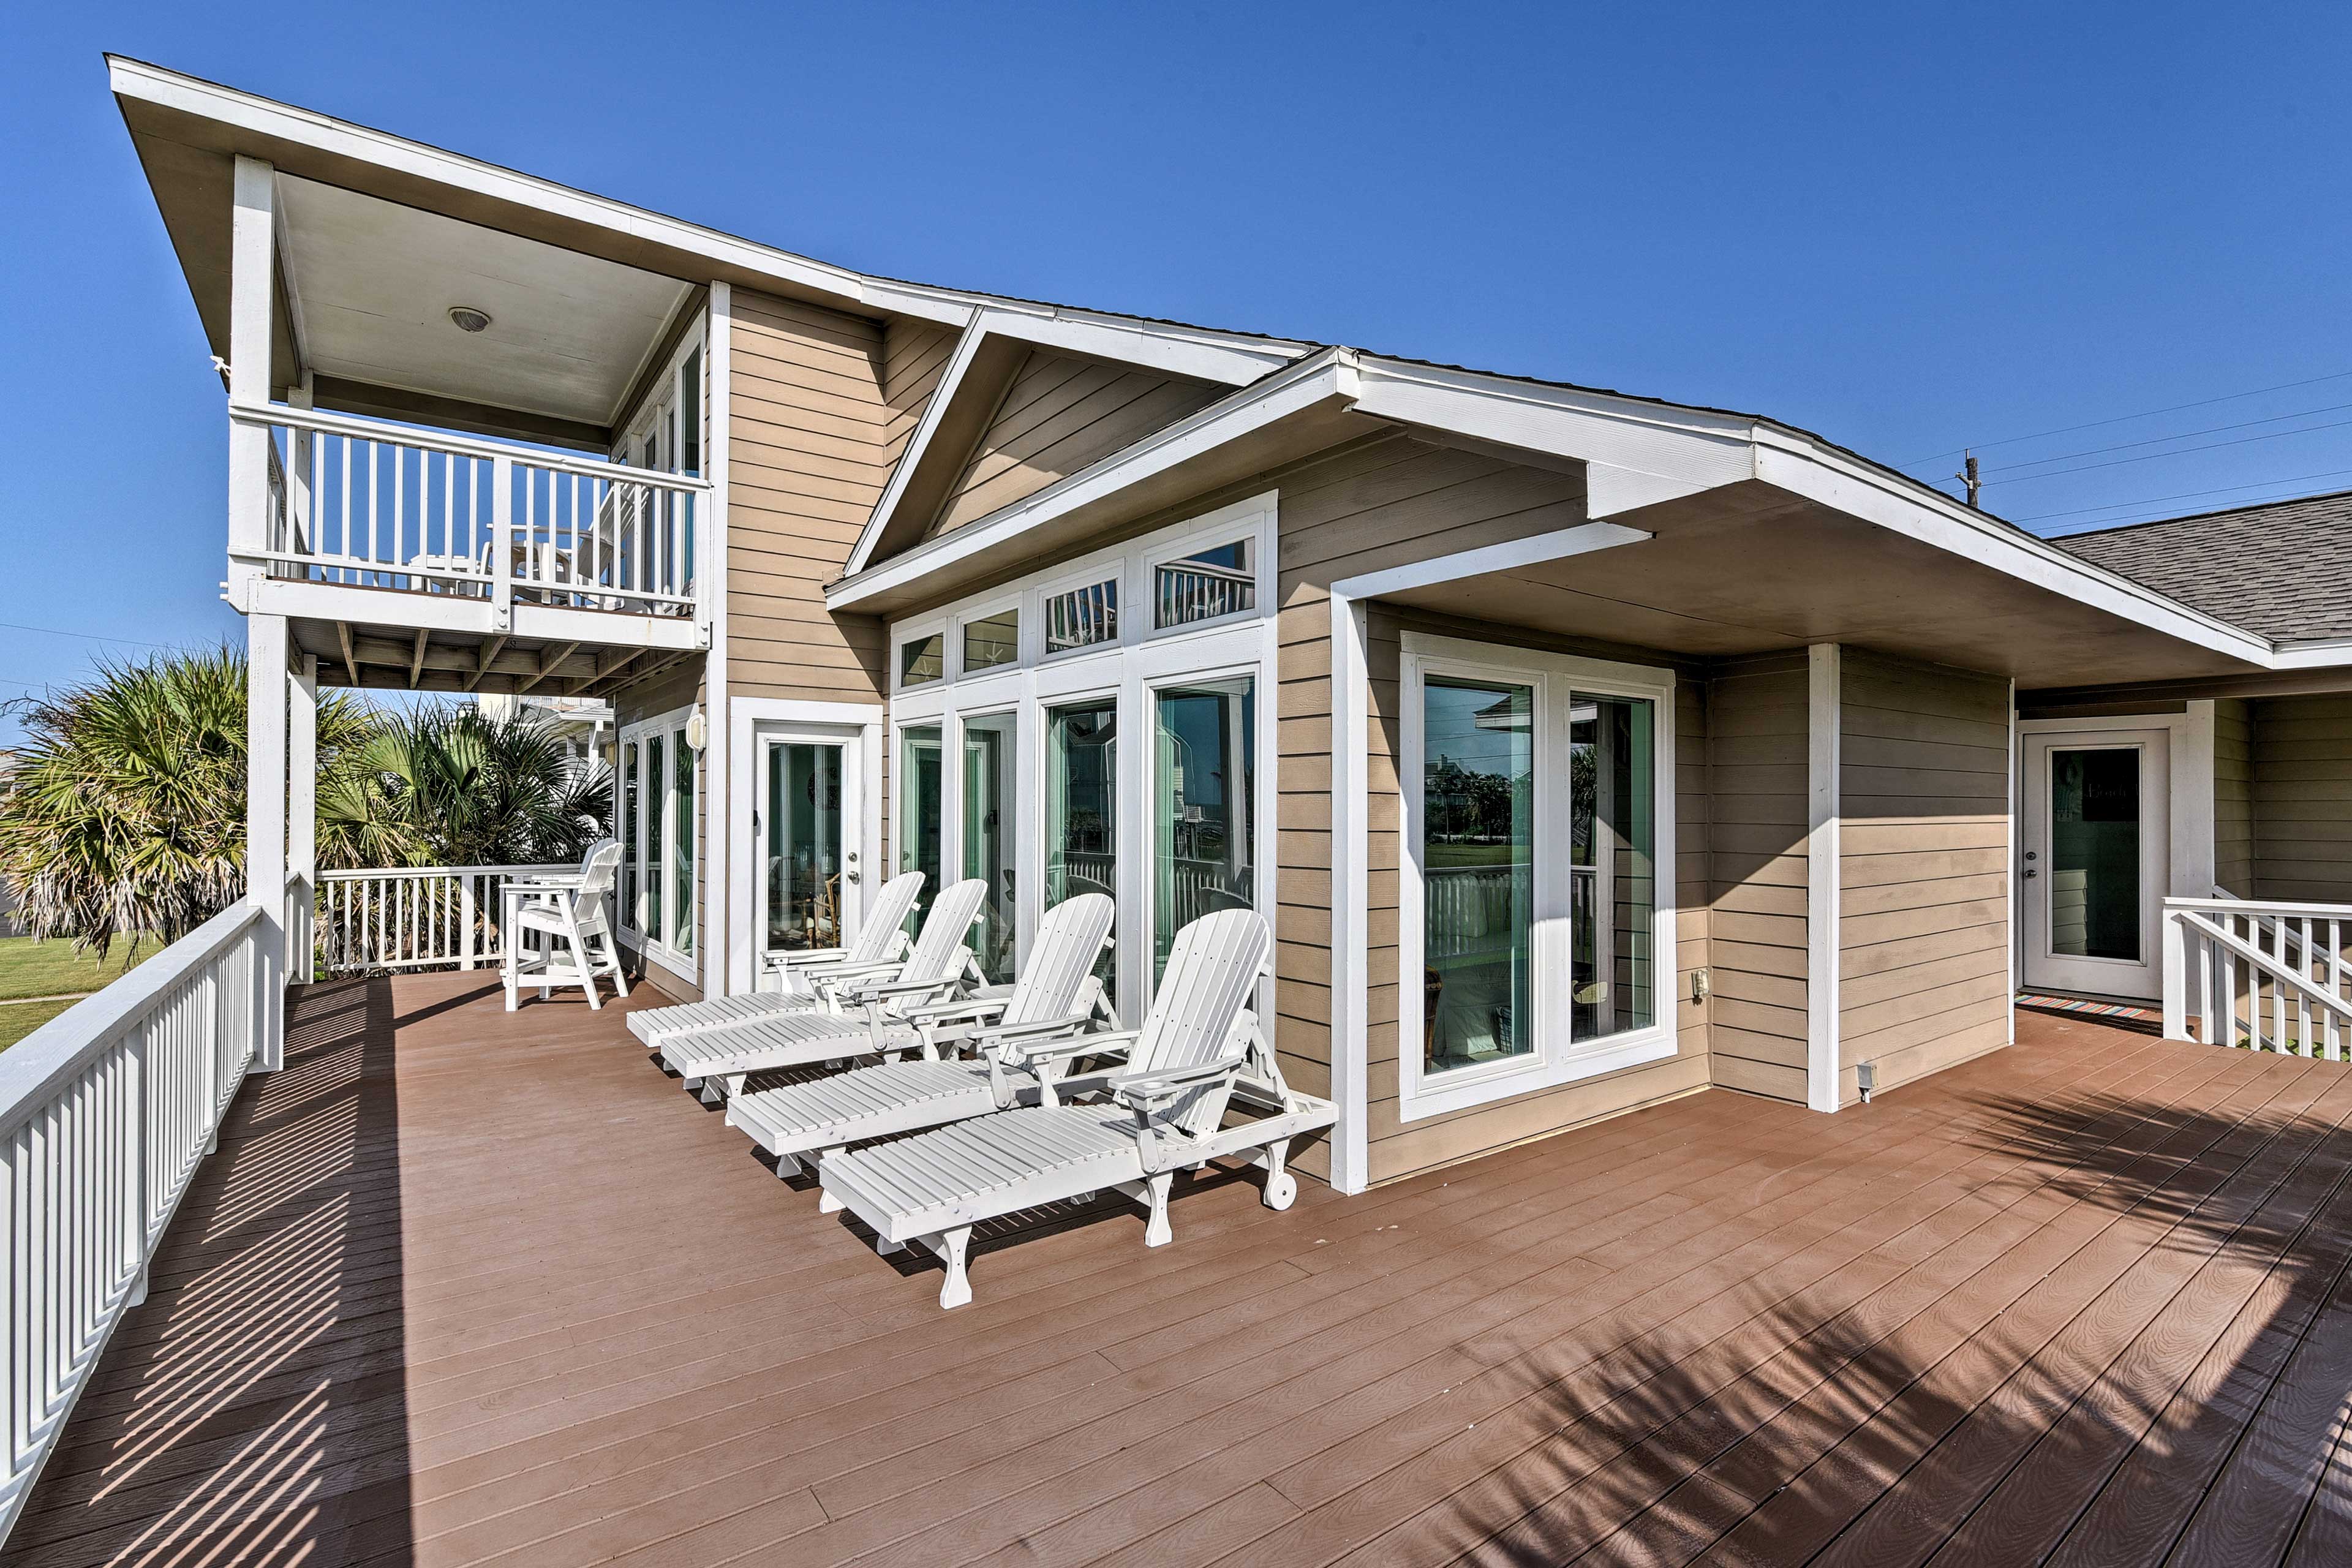 Soak up the sun and ocean views from this Galveston vacation rental.